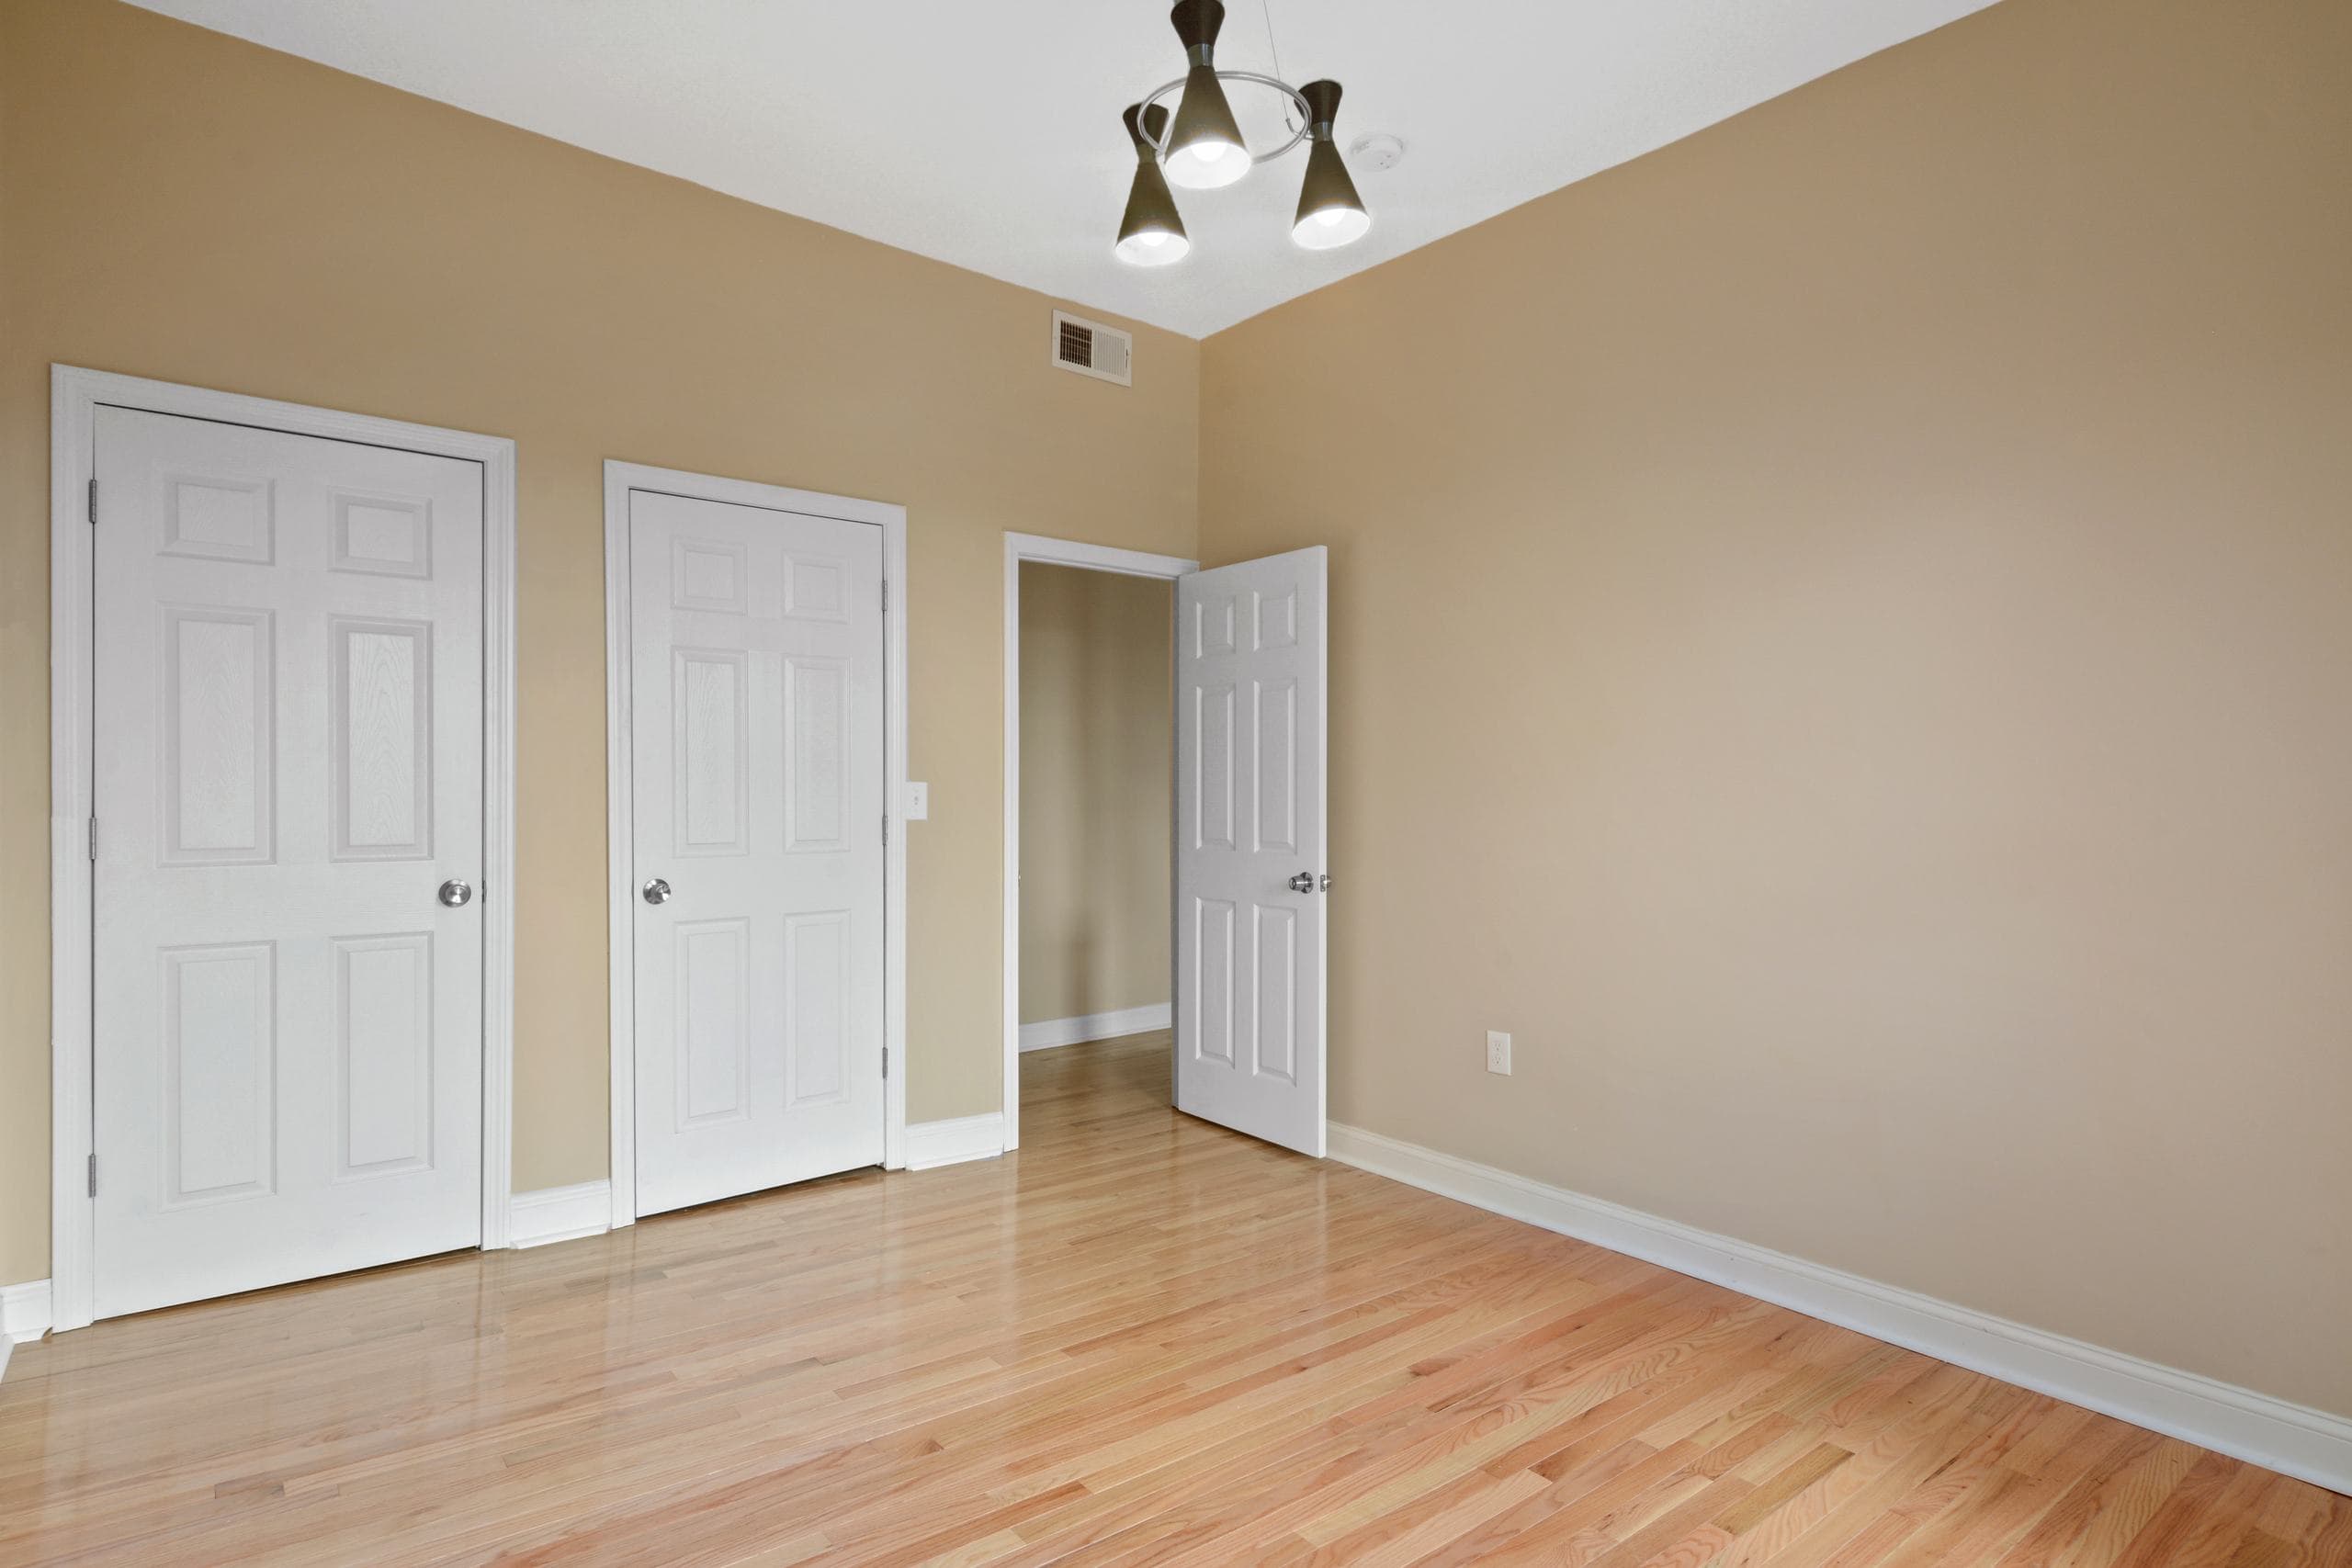 Photo 19 of #1159: Queen Bedroom A at June Homes